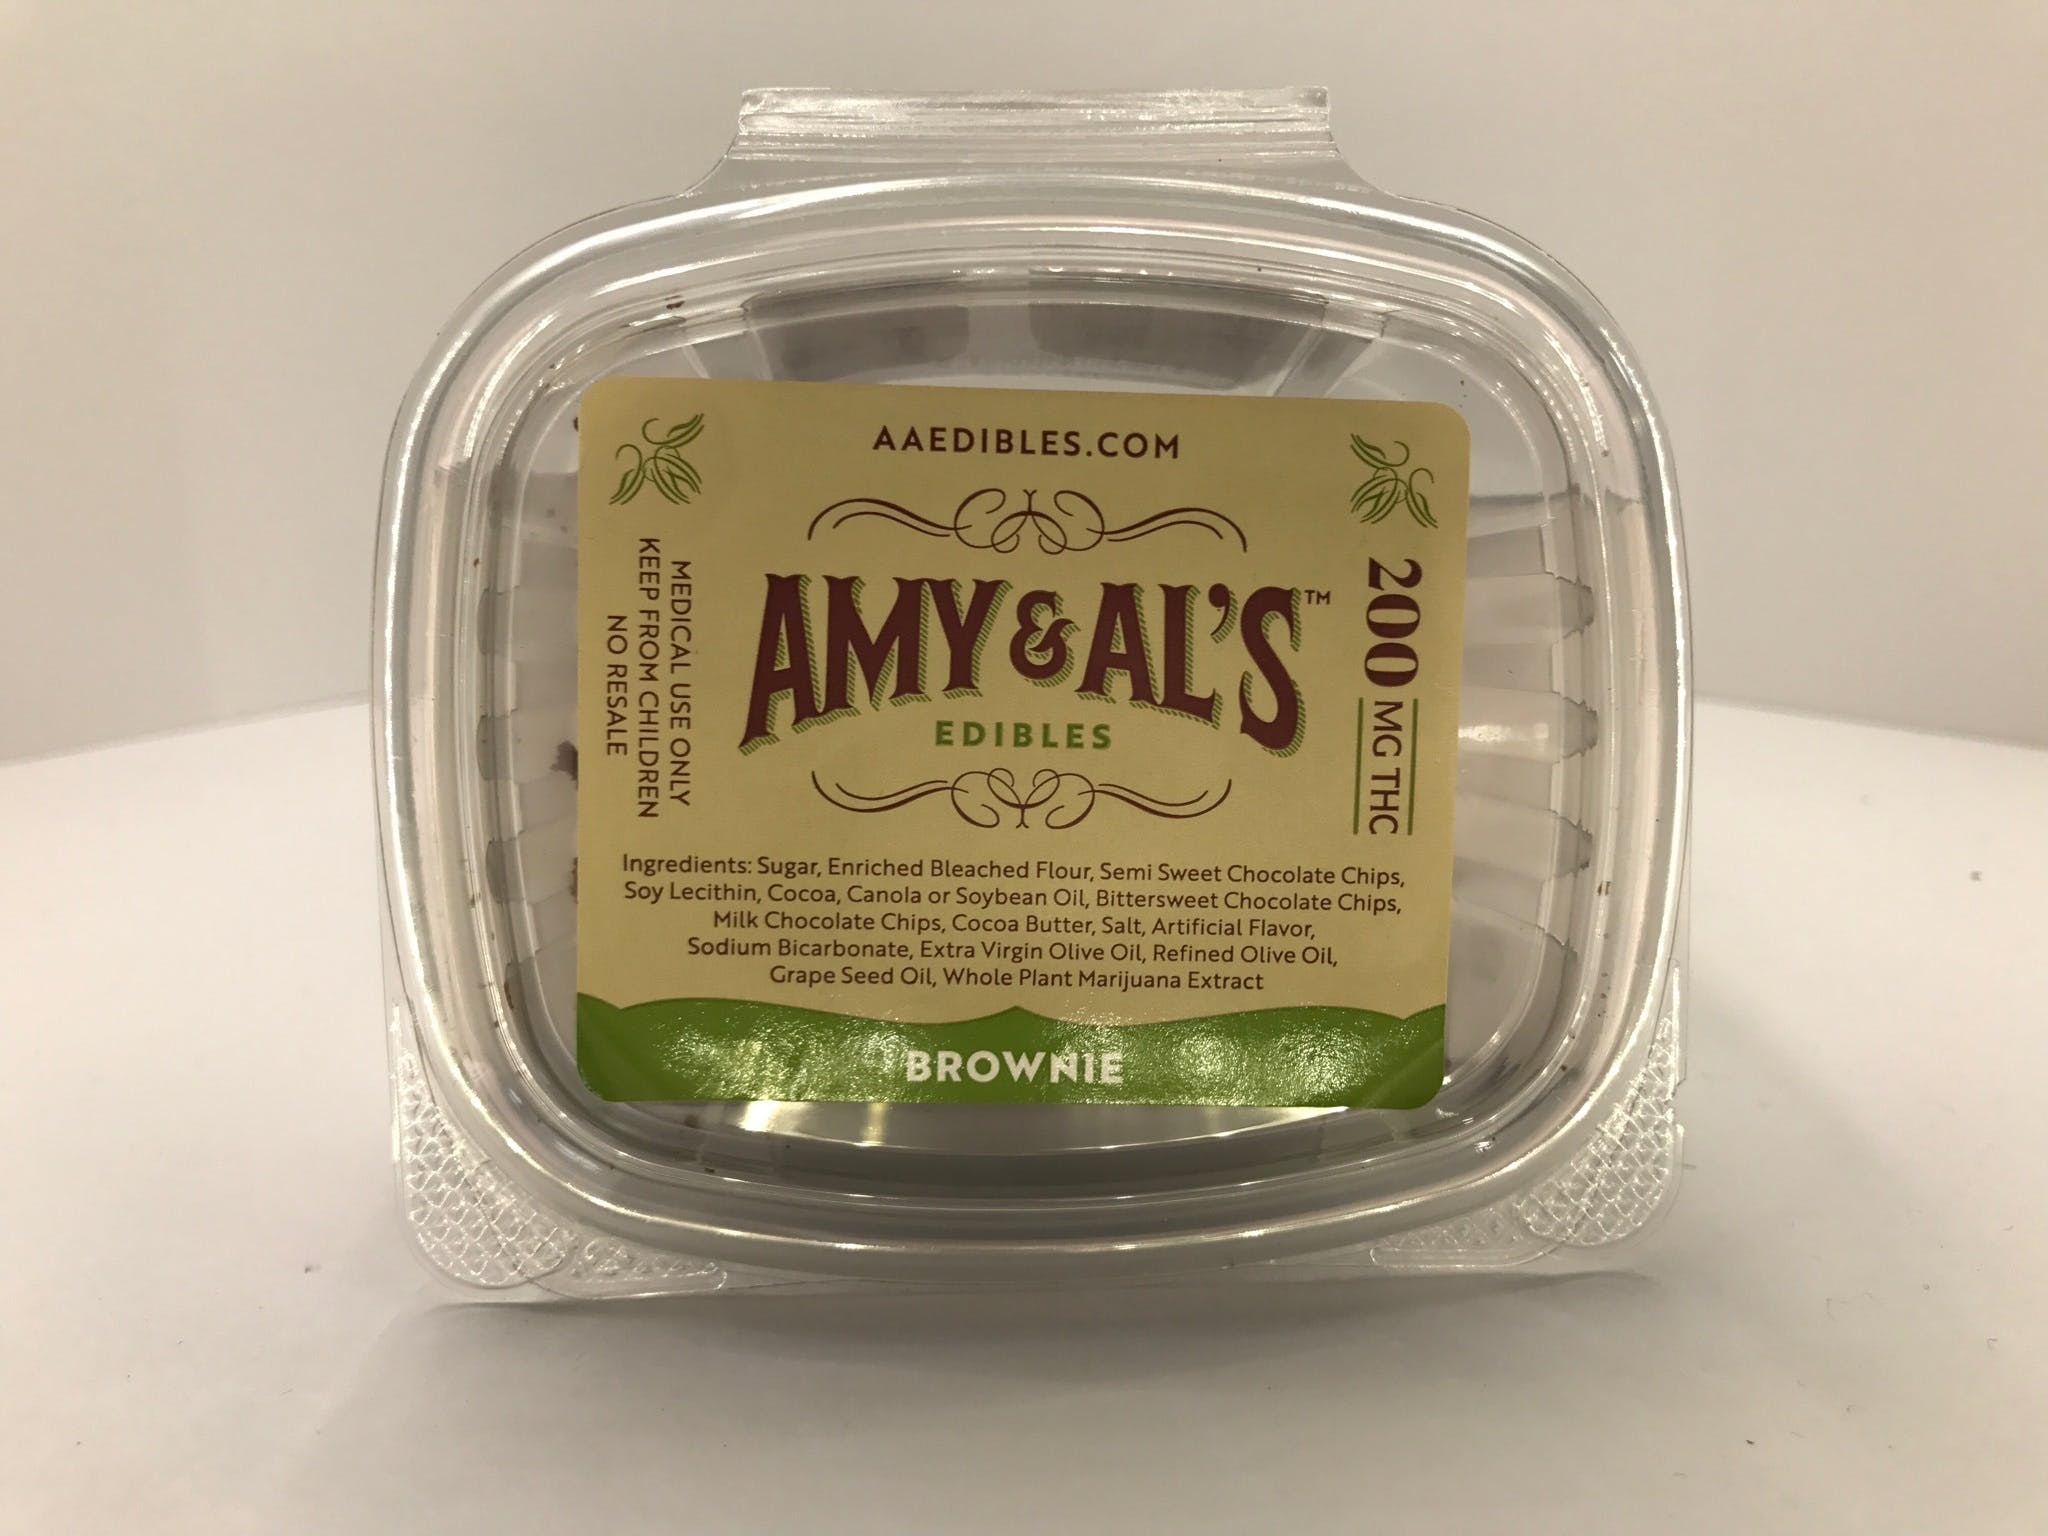 edible-amy-a-als-brownie-400mg